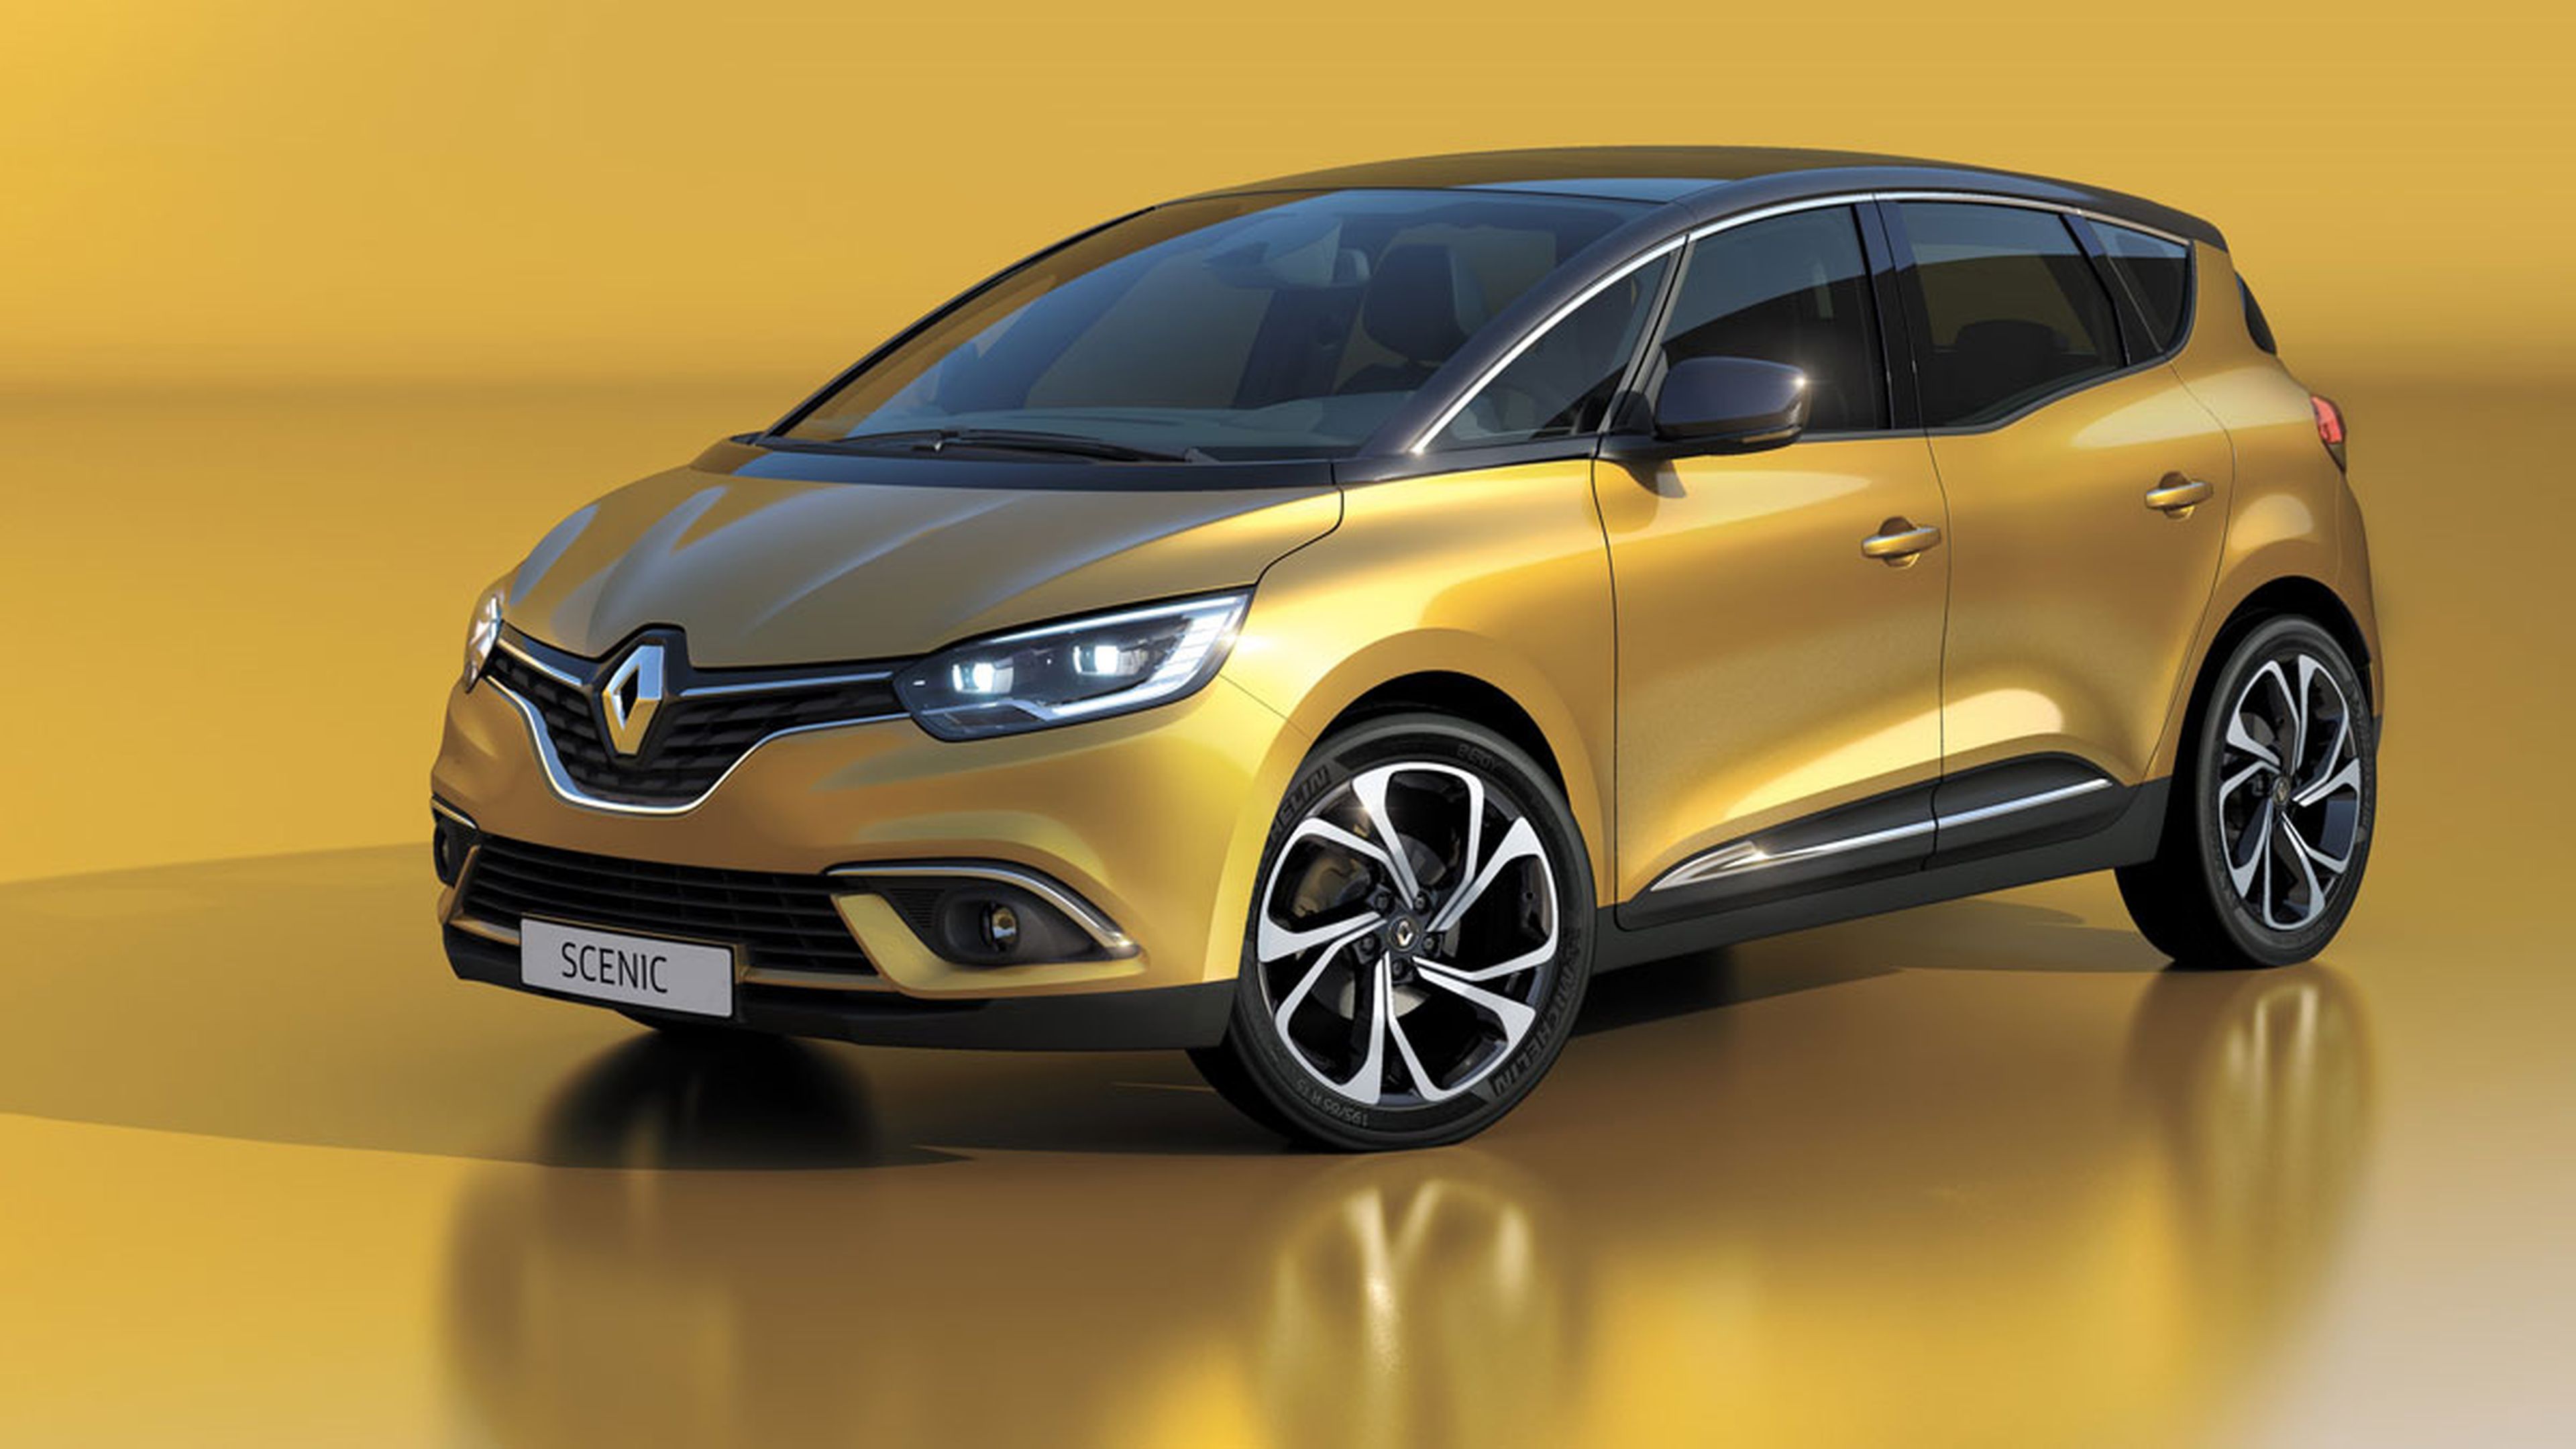 Renault Scénic 2016 frontal 1